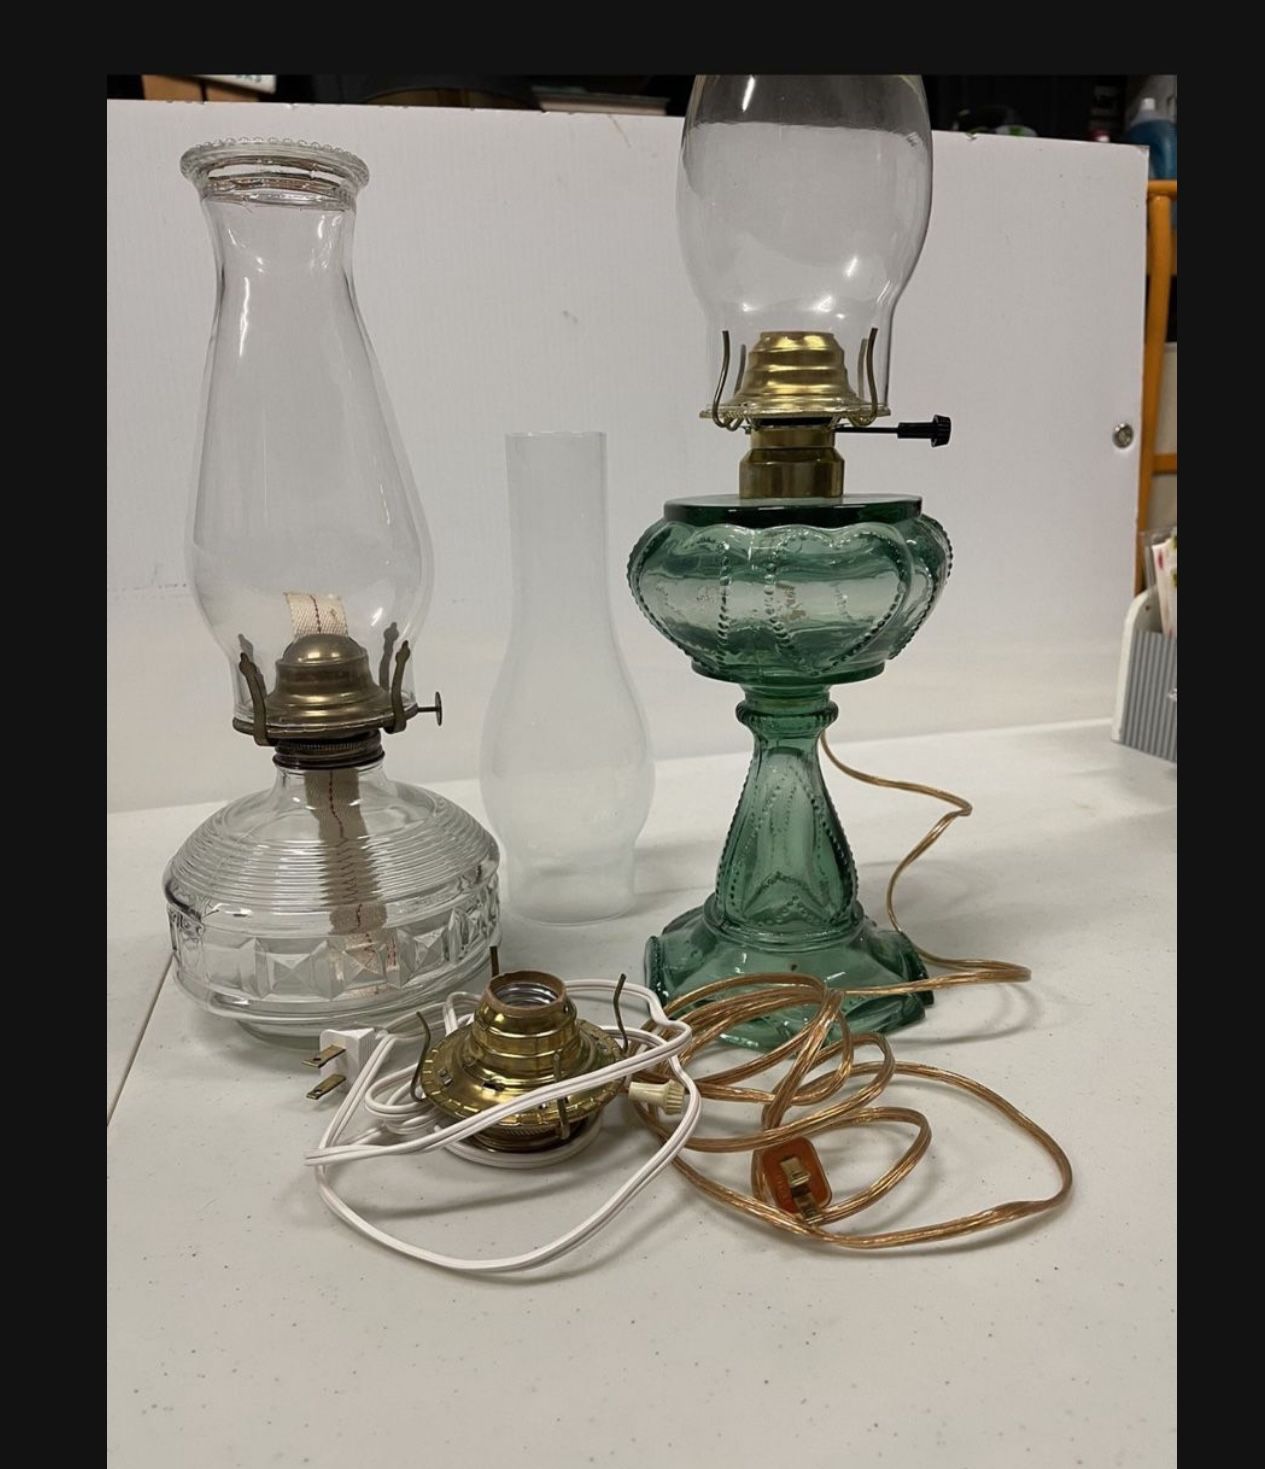 Vintage Oil Lamps Can Be Electric